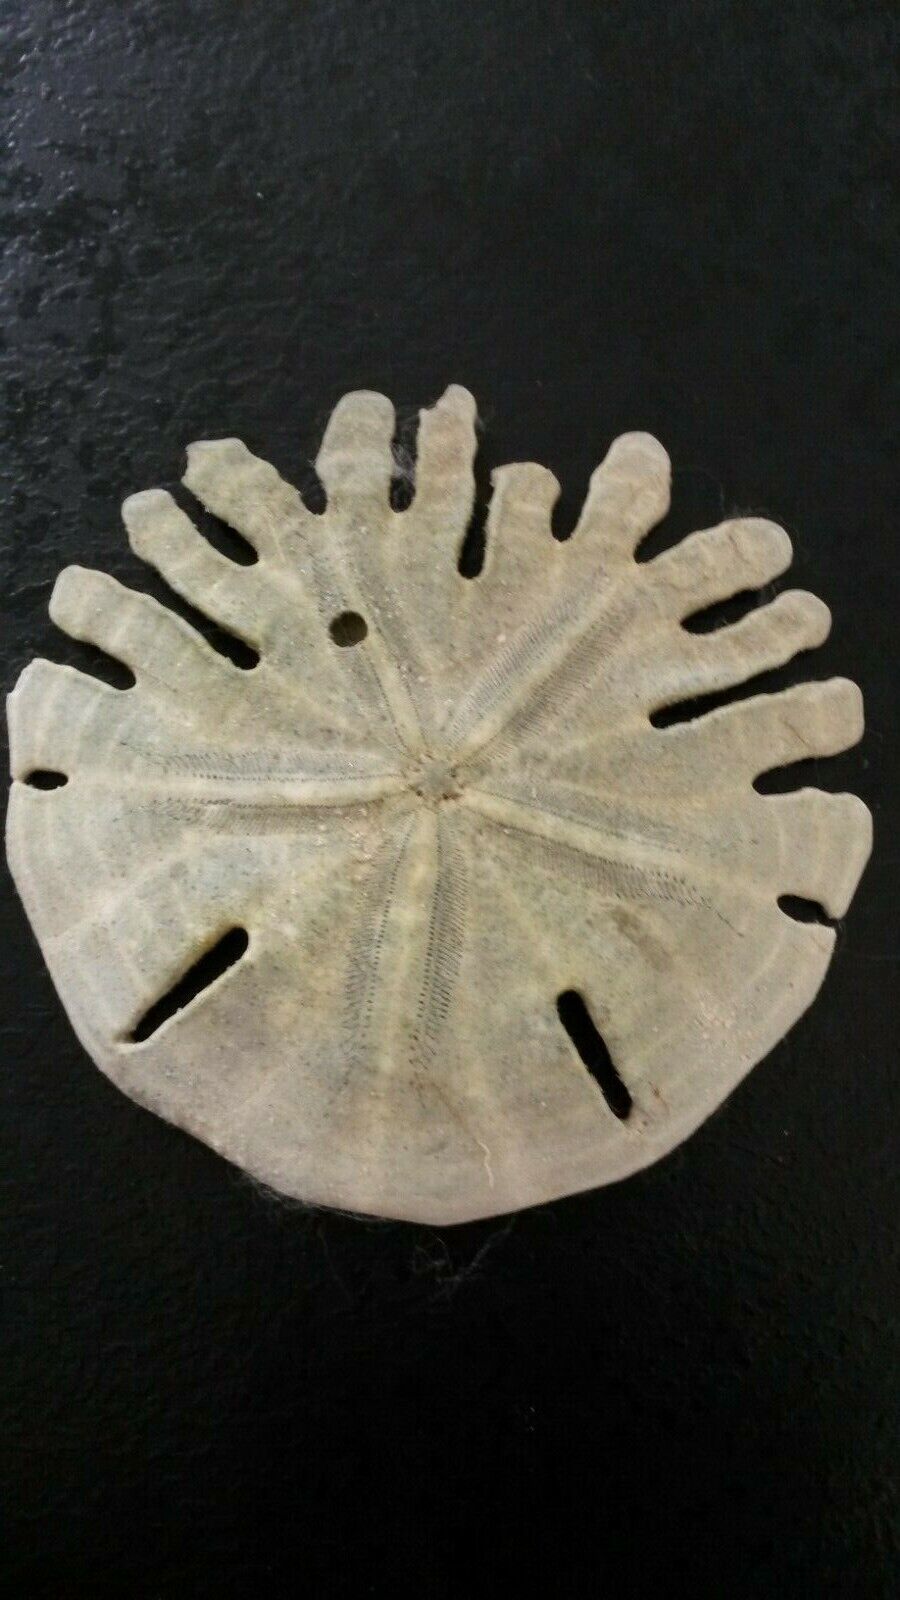 Large Rotula Deciesdigitata Sea Urchin Current Cote Chicago Africa Collection Wx